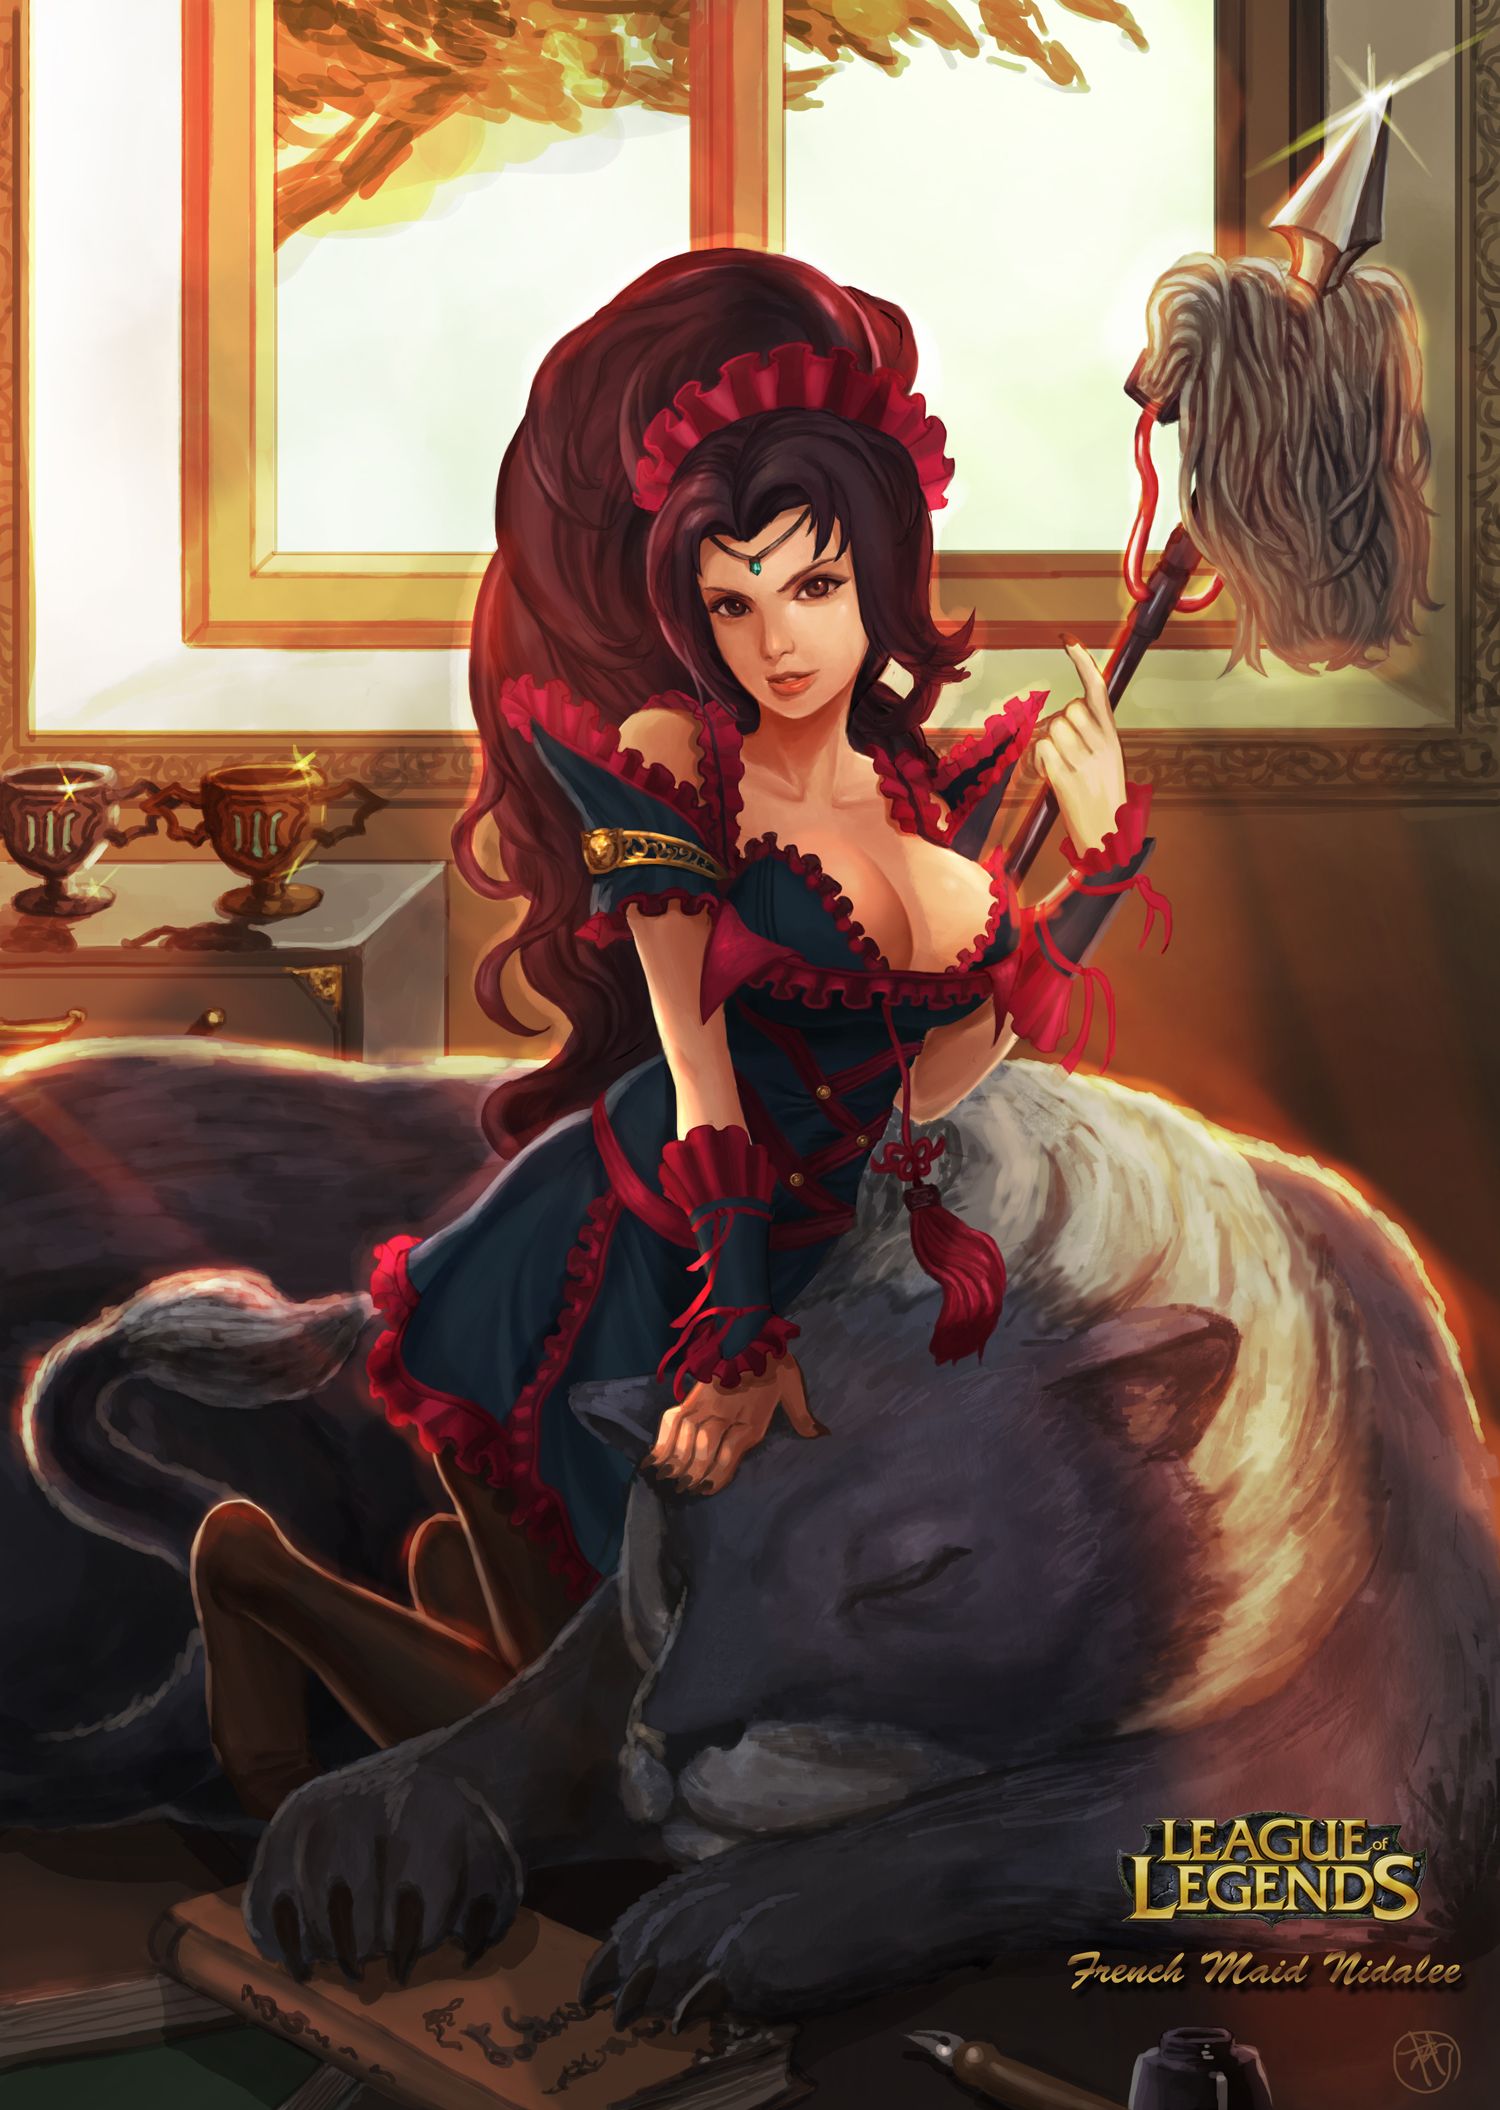 Best of French maid nidalee fan art